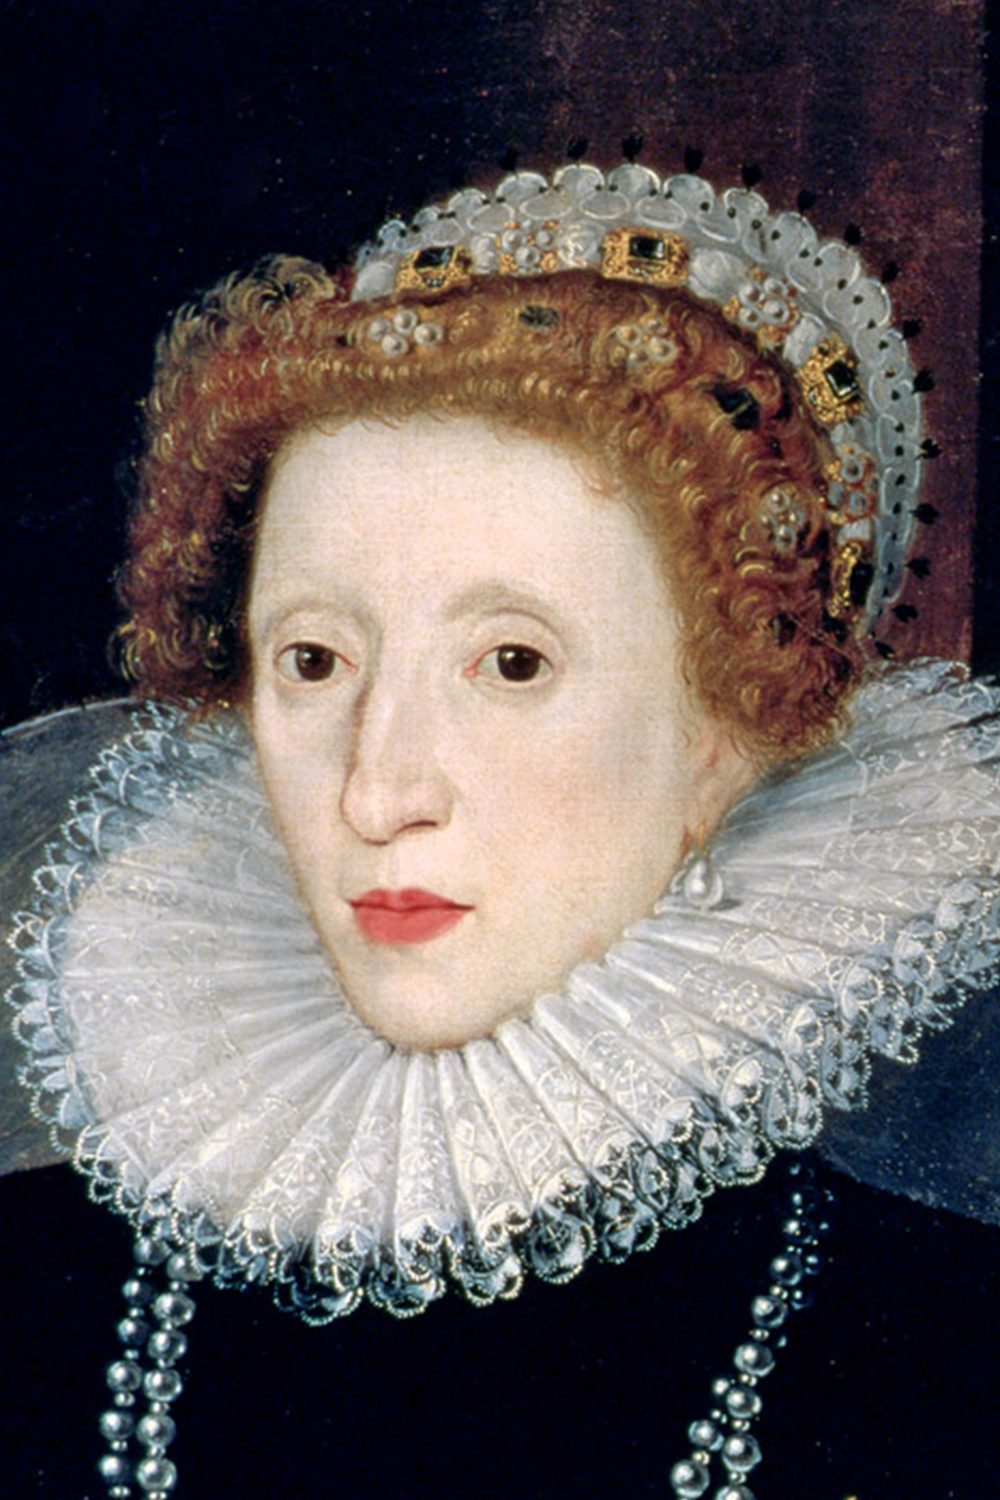 A portrait of Queen Elizabeth I. Her lips are red. she is wearing a dark dress a pearl necklace and a lace collar.